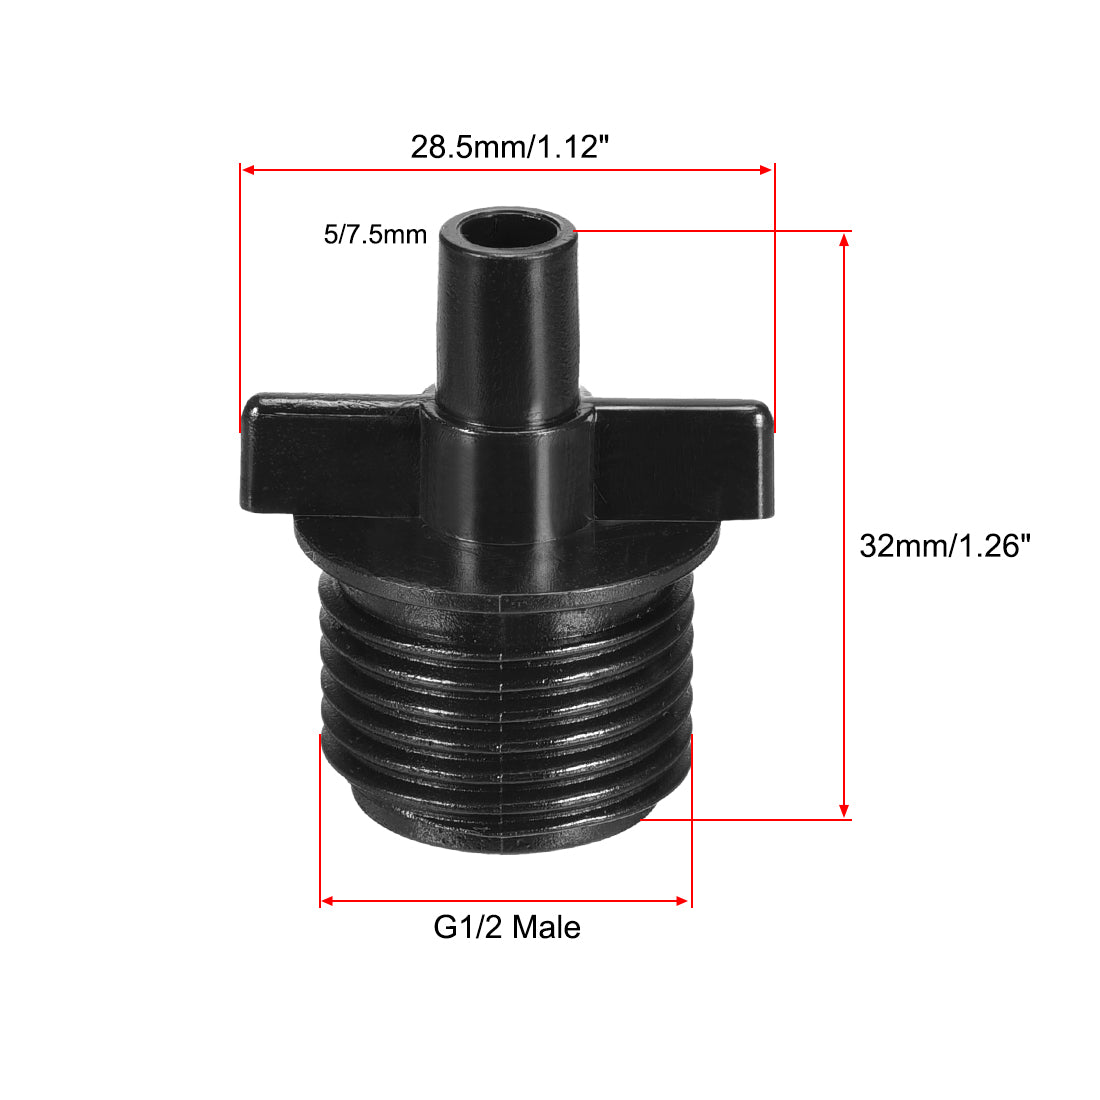 uxcell Uxcell Barb Drip Pipe Connector G1/2 Male Thread 5/7.5mm Hose Fitting Plastic 10pcs